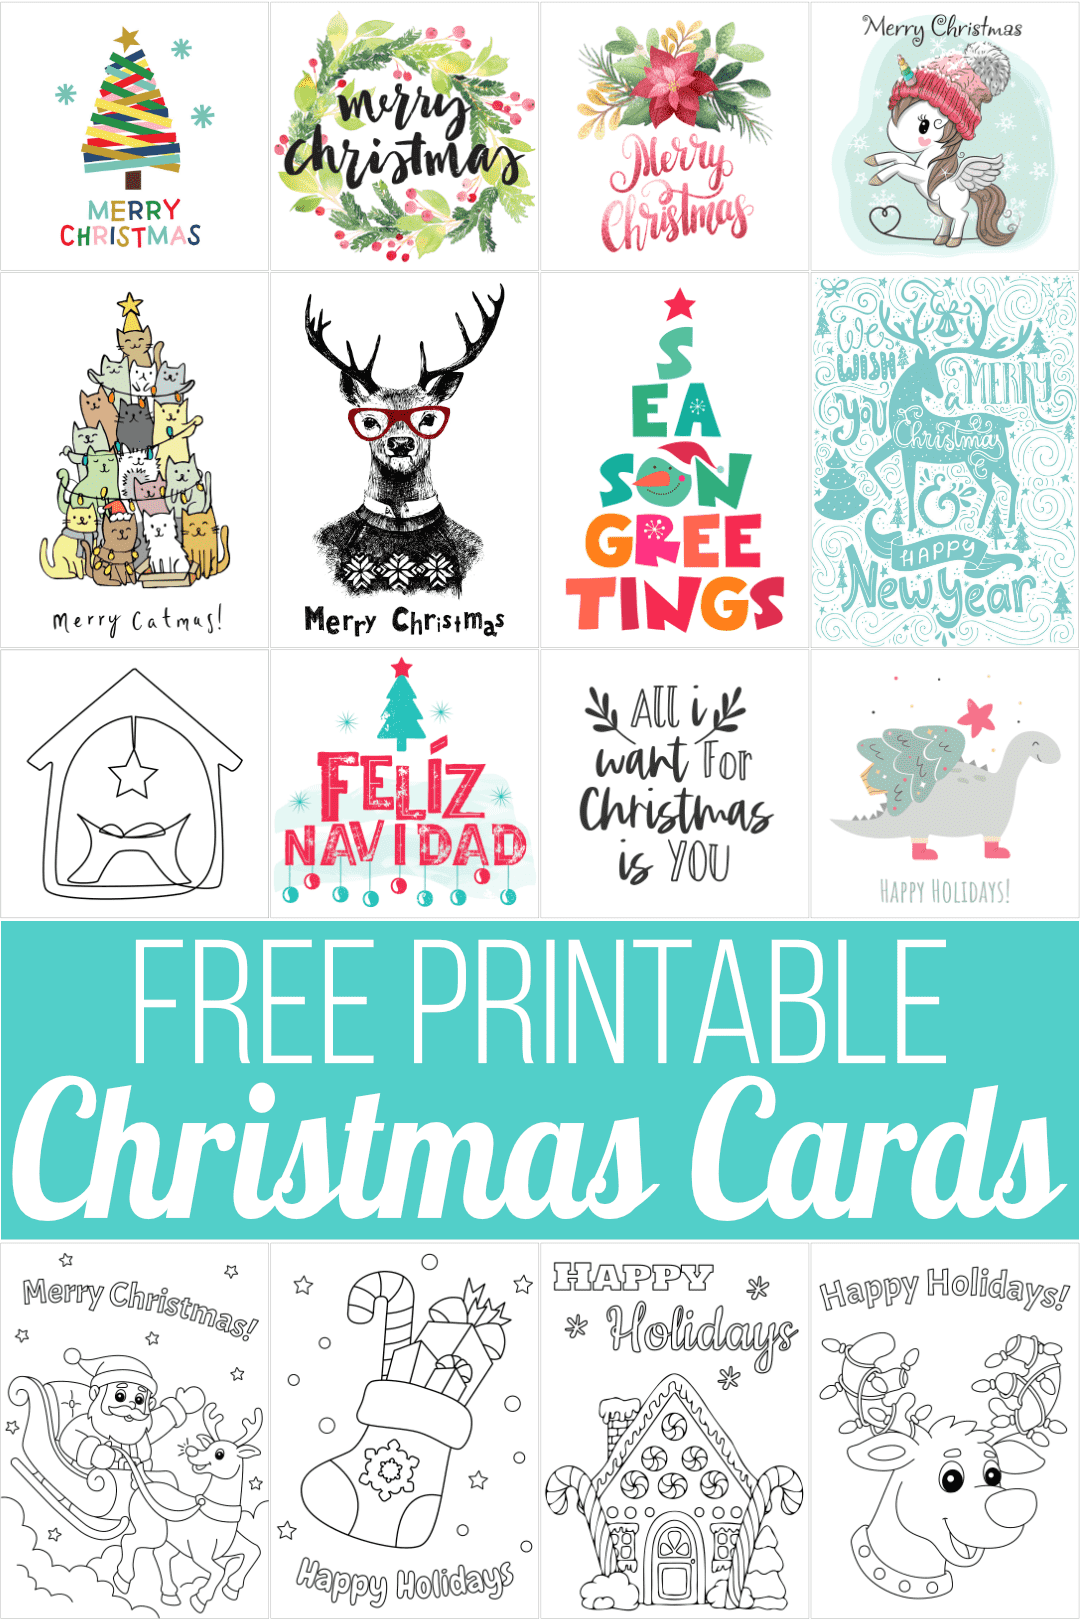 23 Free Printable Christmas Cards for 23 With Regard To Christmas Photo Cards Templates Free Downloads